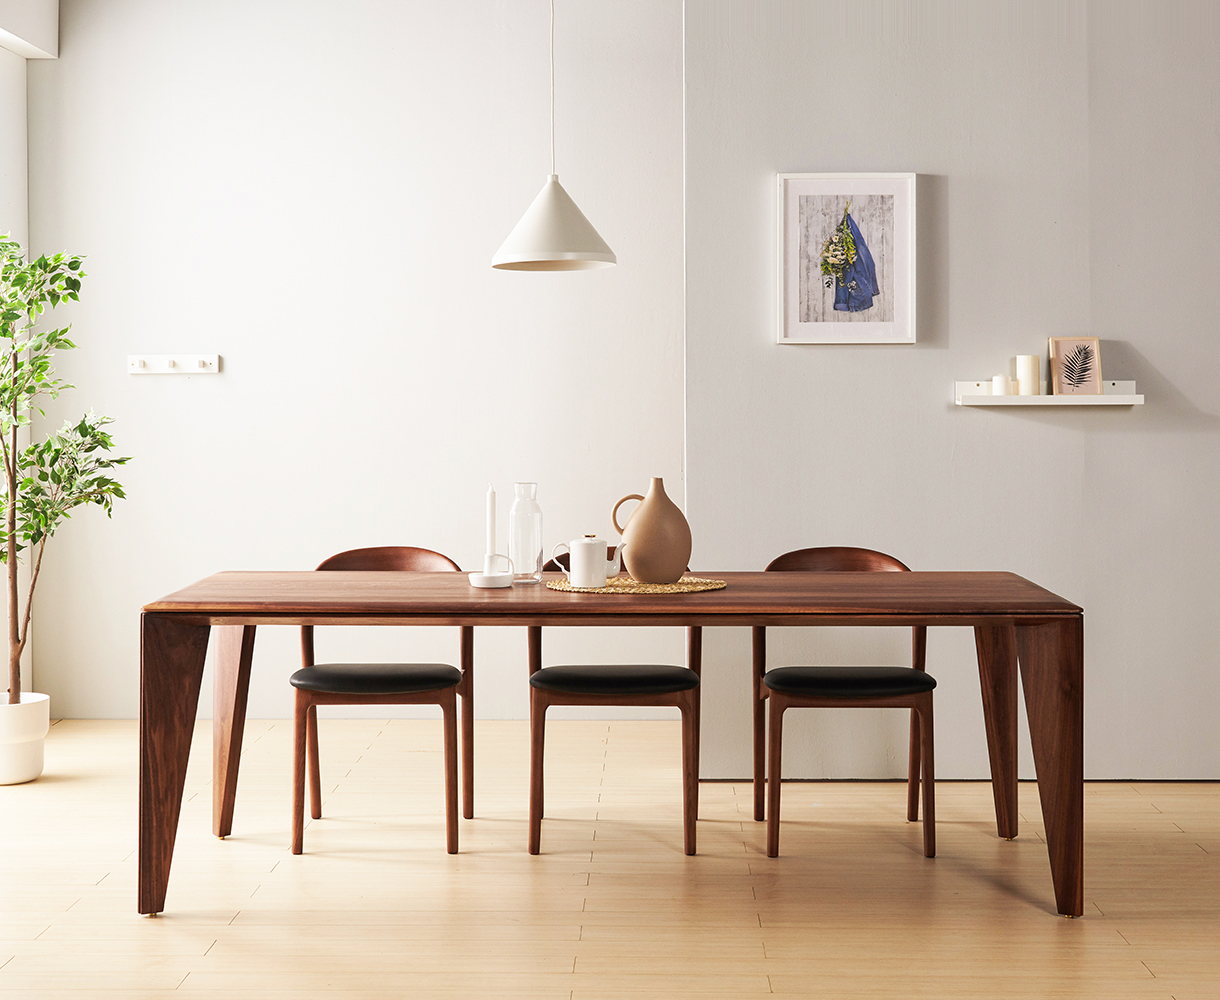 <p style="text-align:left; font-size:16px; margin-top:26px;">Judd Table<br><span style="color:#666;">₩ 3,180,000</span></p>